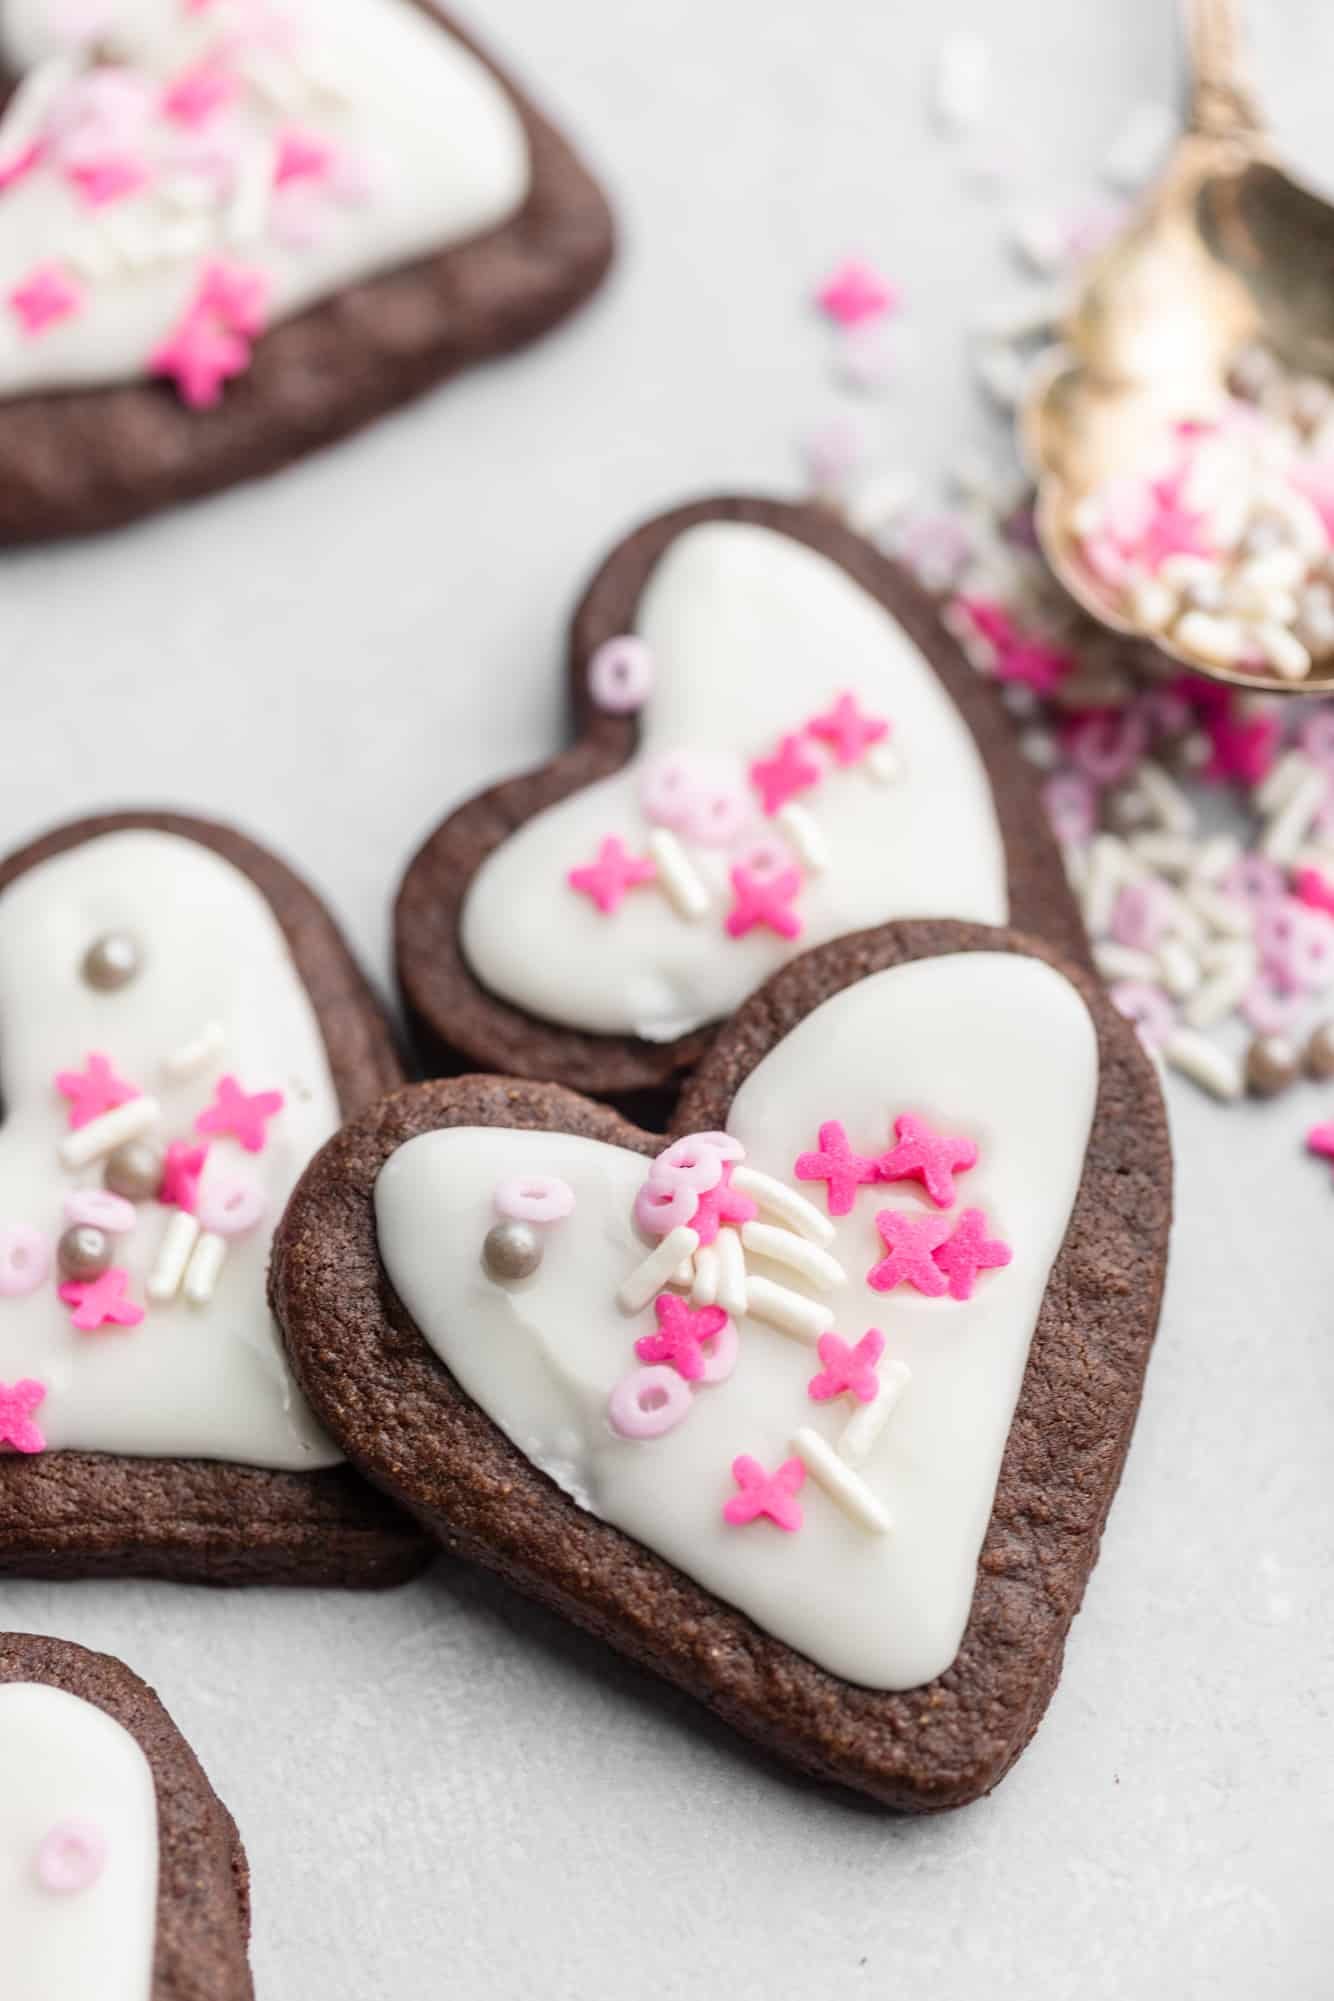 heart-shaped chocolate sugar cookies decorated with white icing and pink sprinkles.